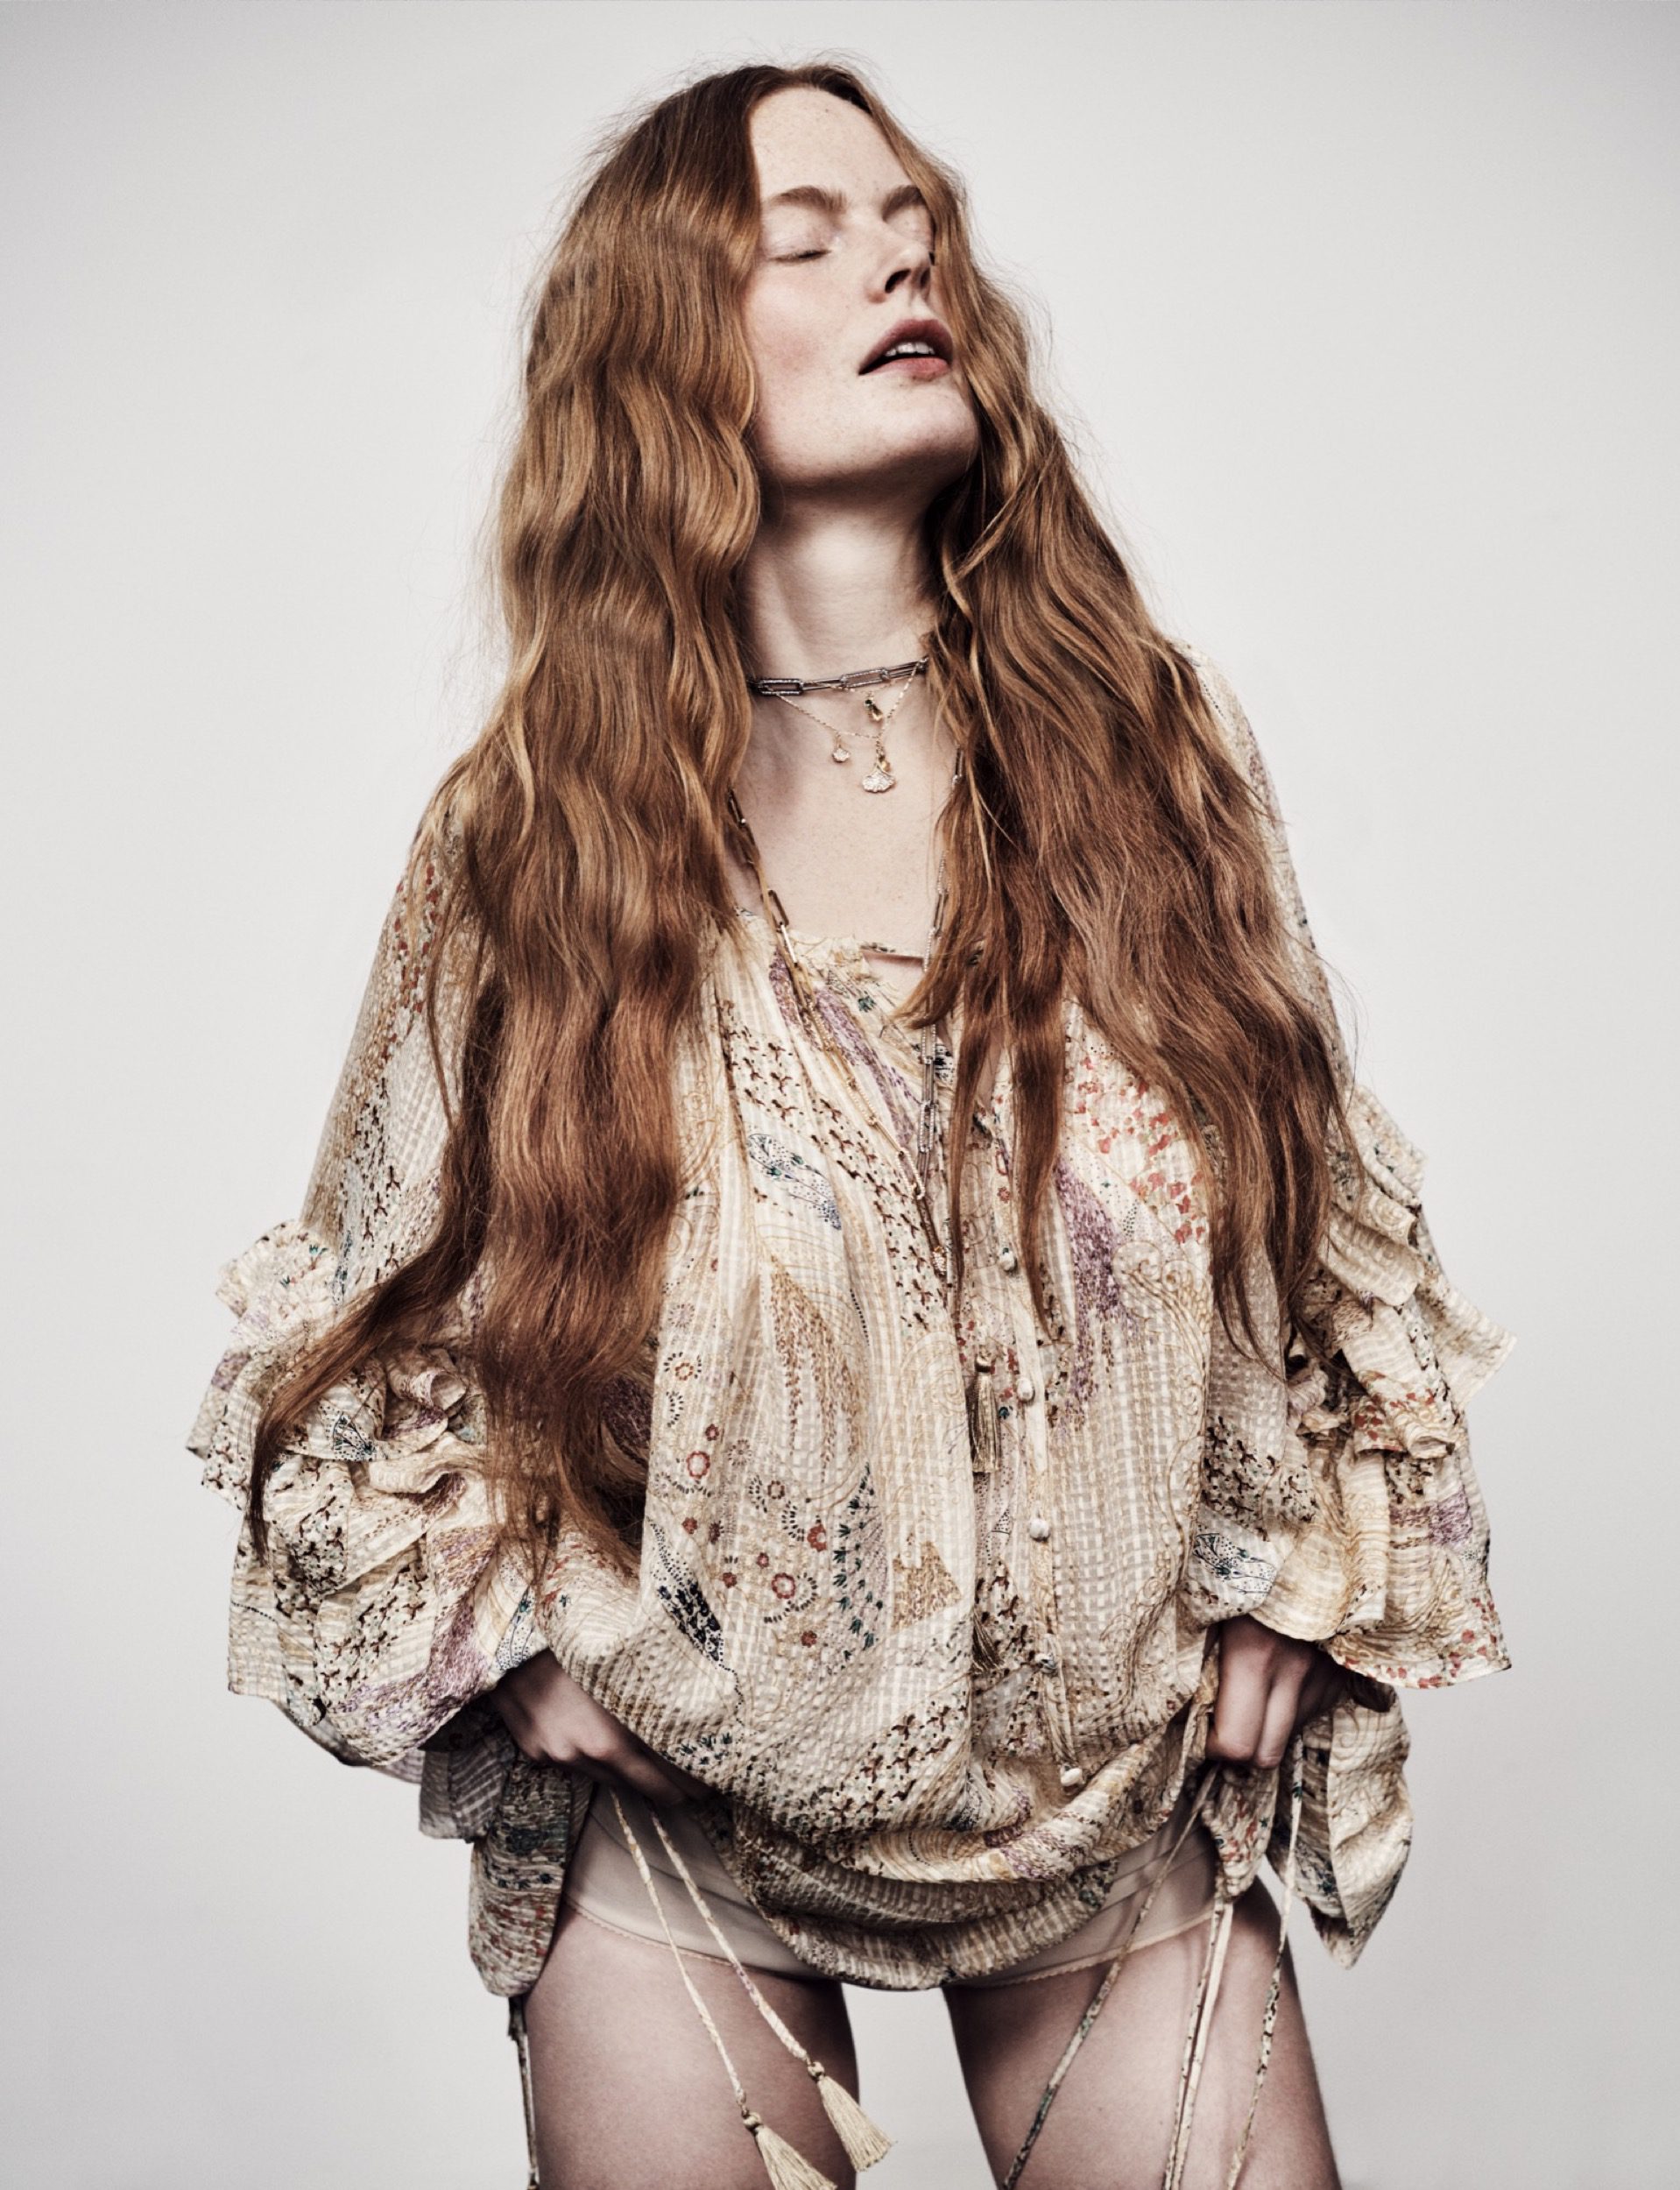 kathrin-hohberg-marie-claire-pre-raphaelite-jan-welters-06